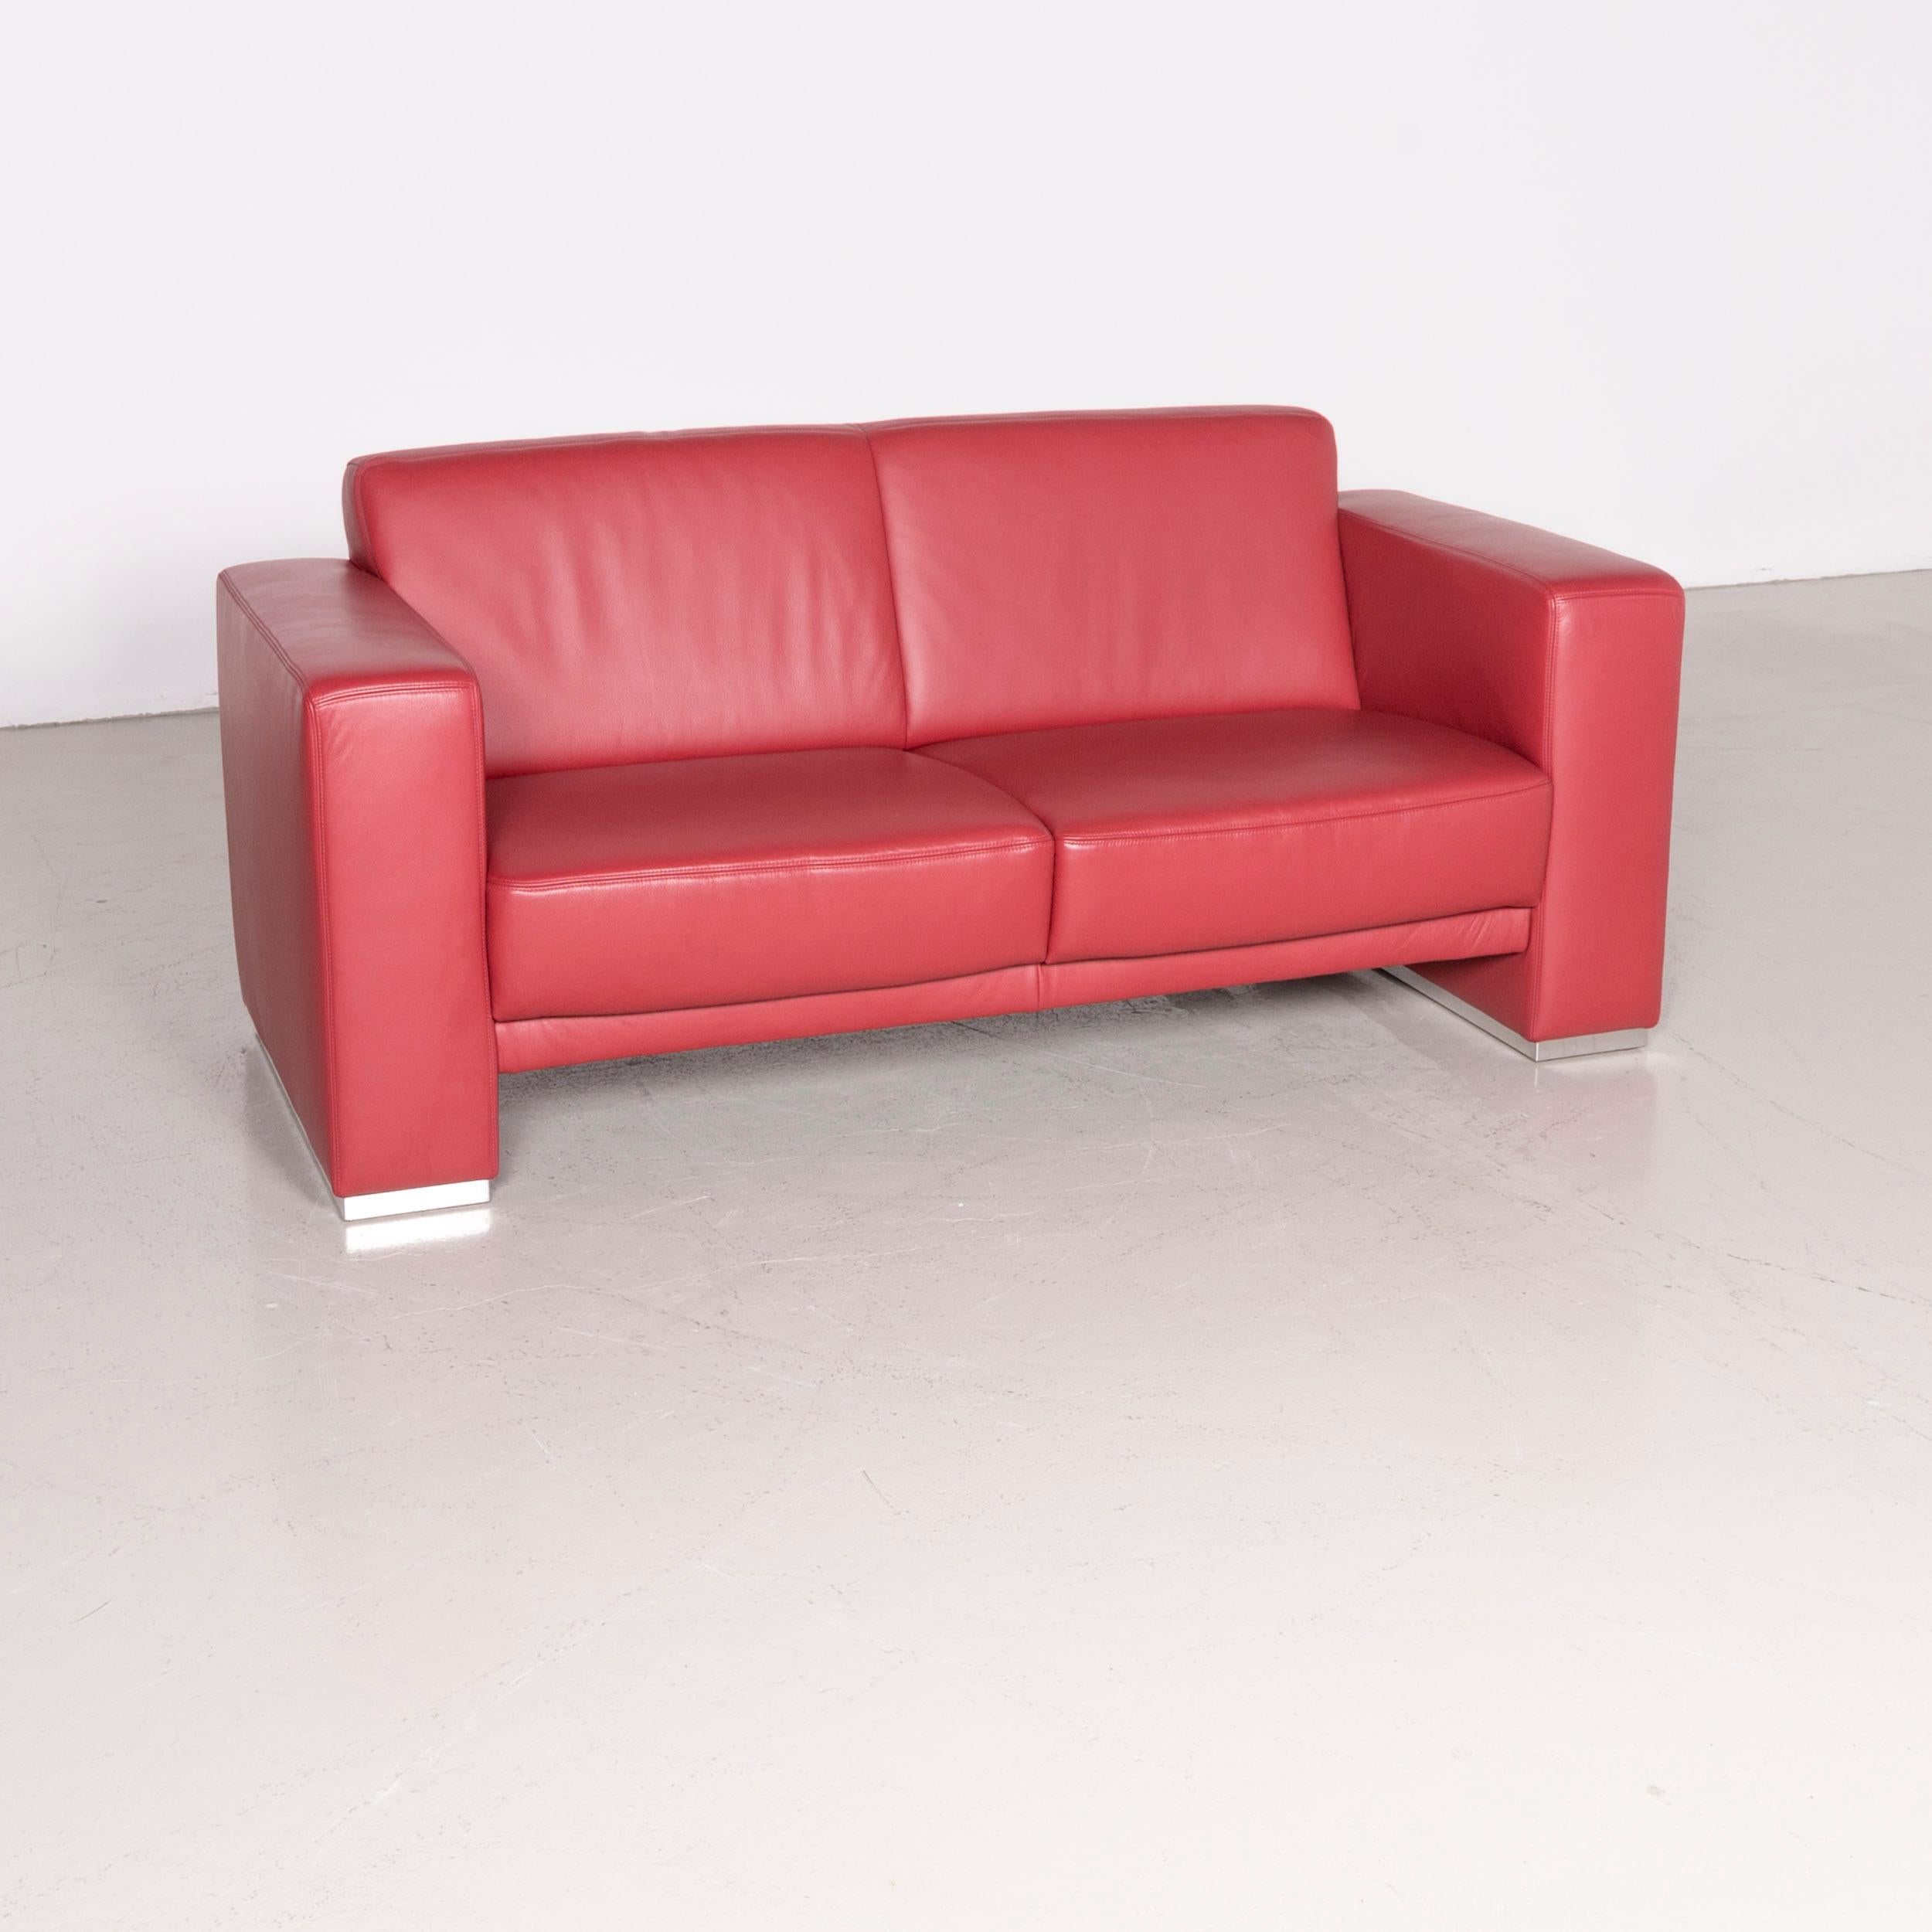 Koinor Nove designer leather sofa red two-seat couch.